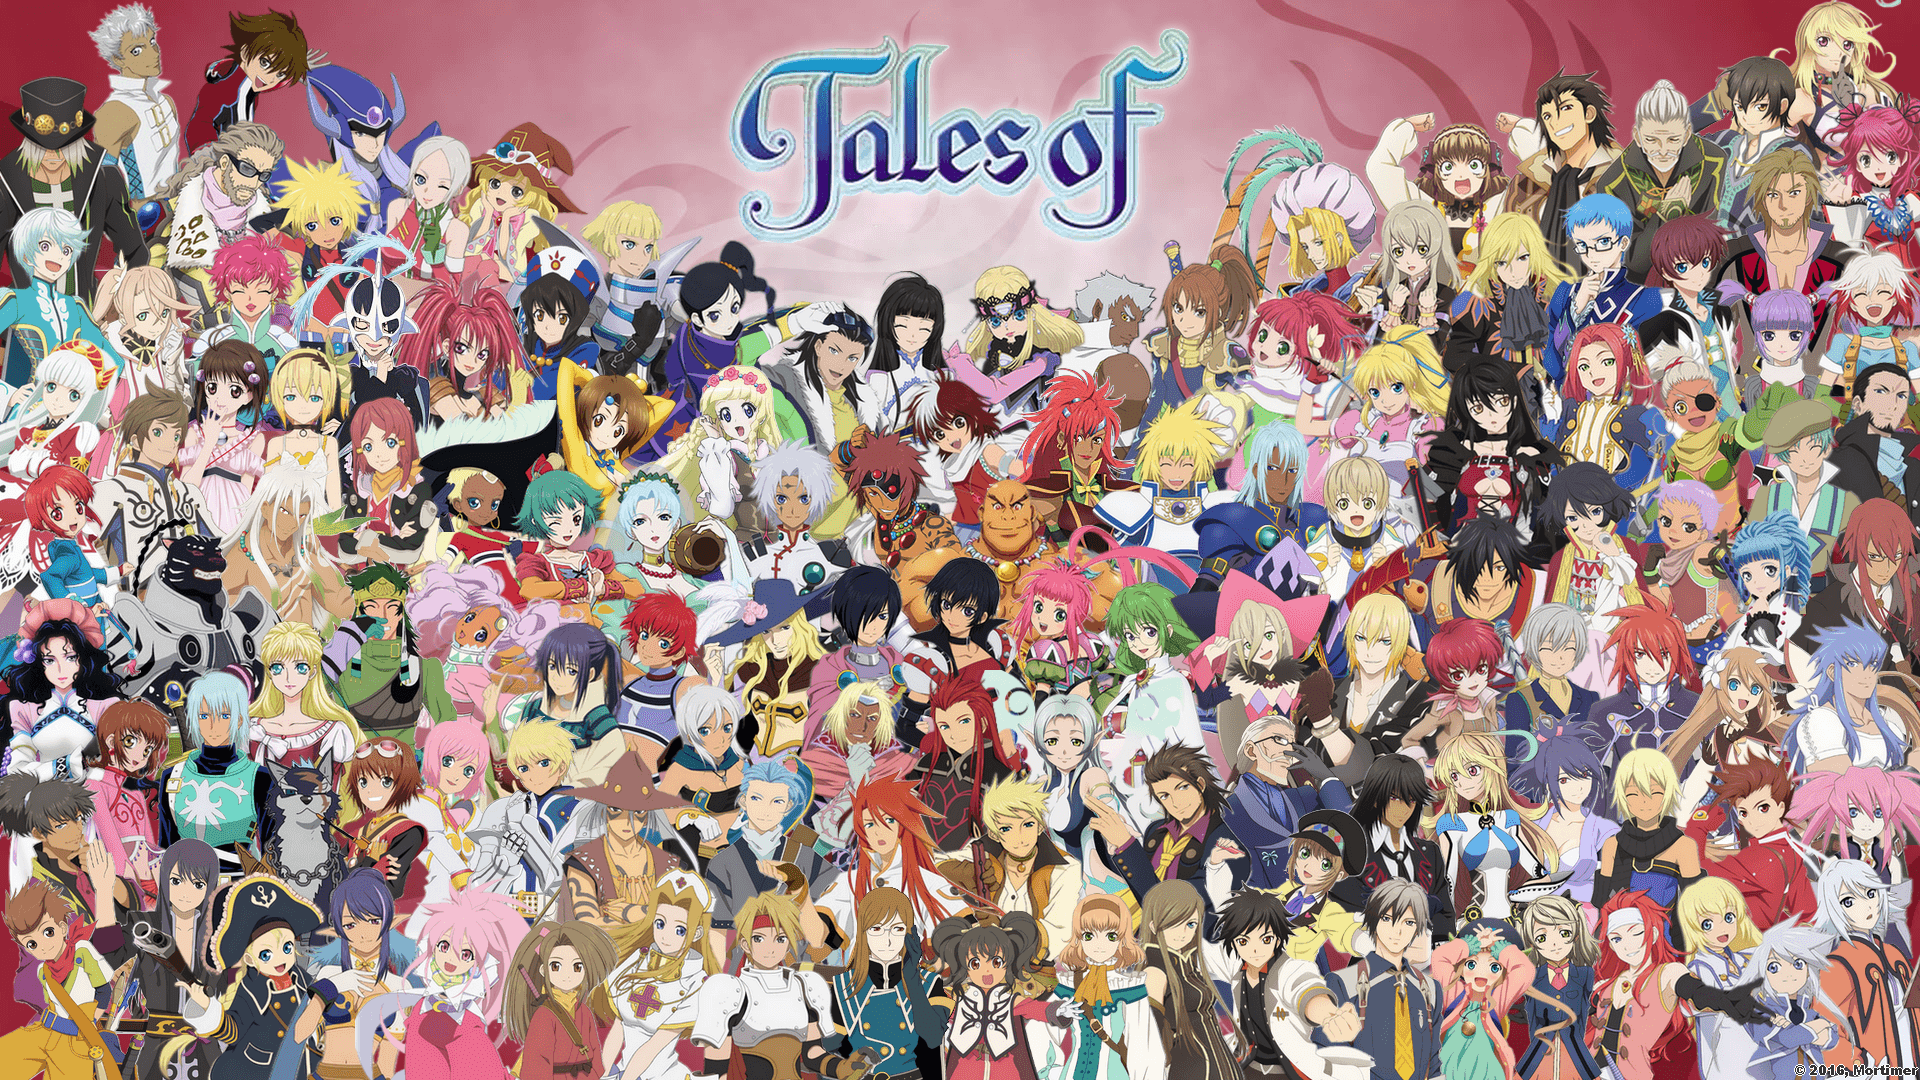 Still didn't have a big Tales wallpaper? Take this one